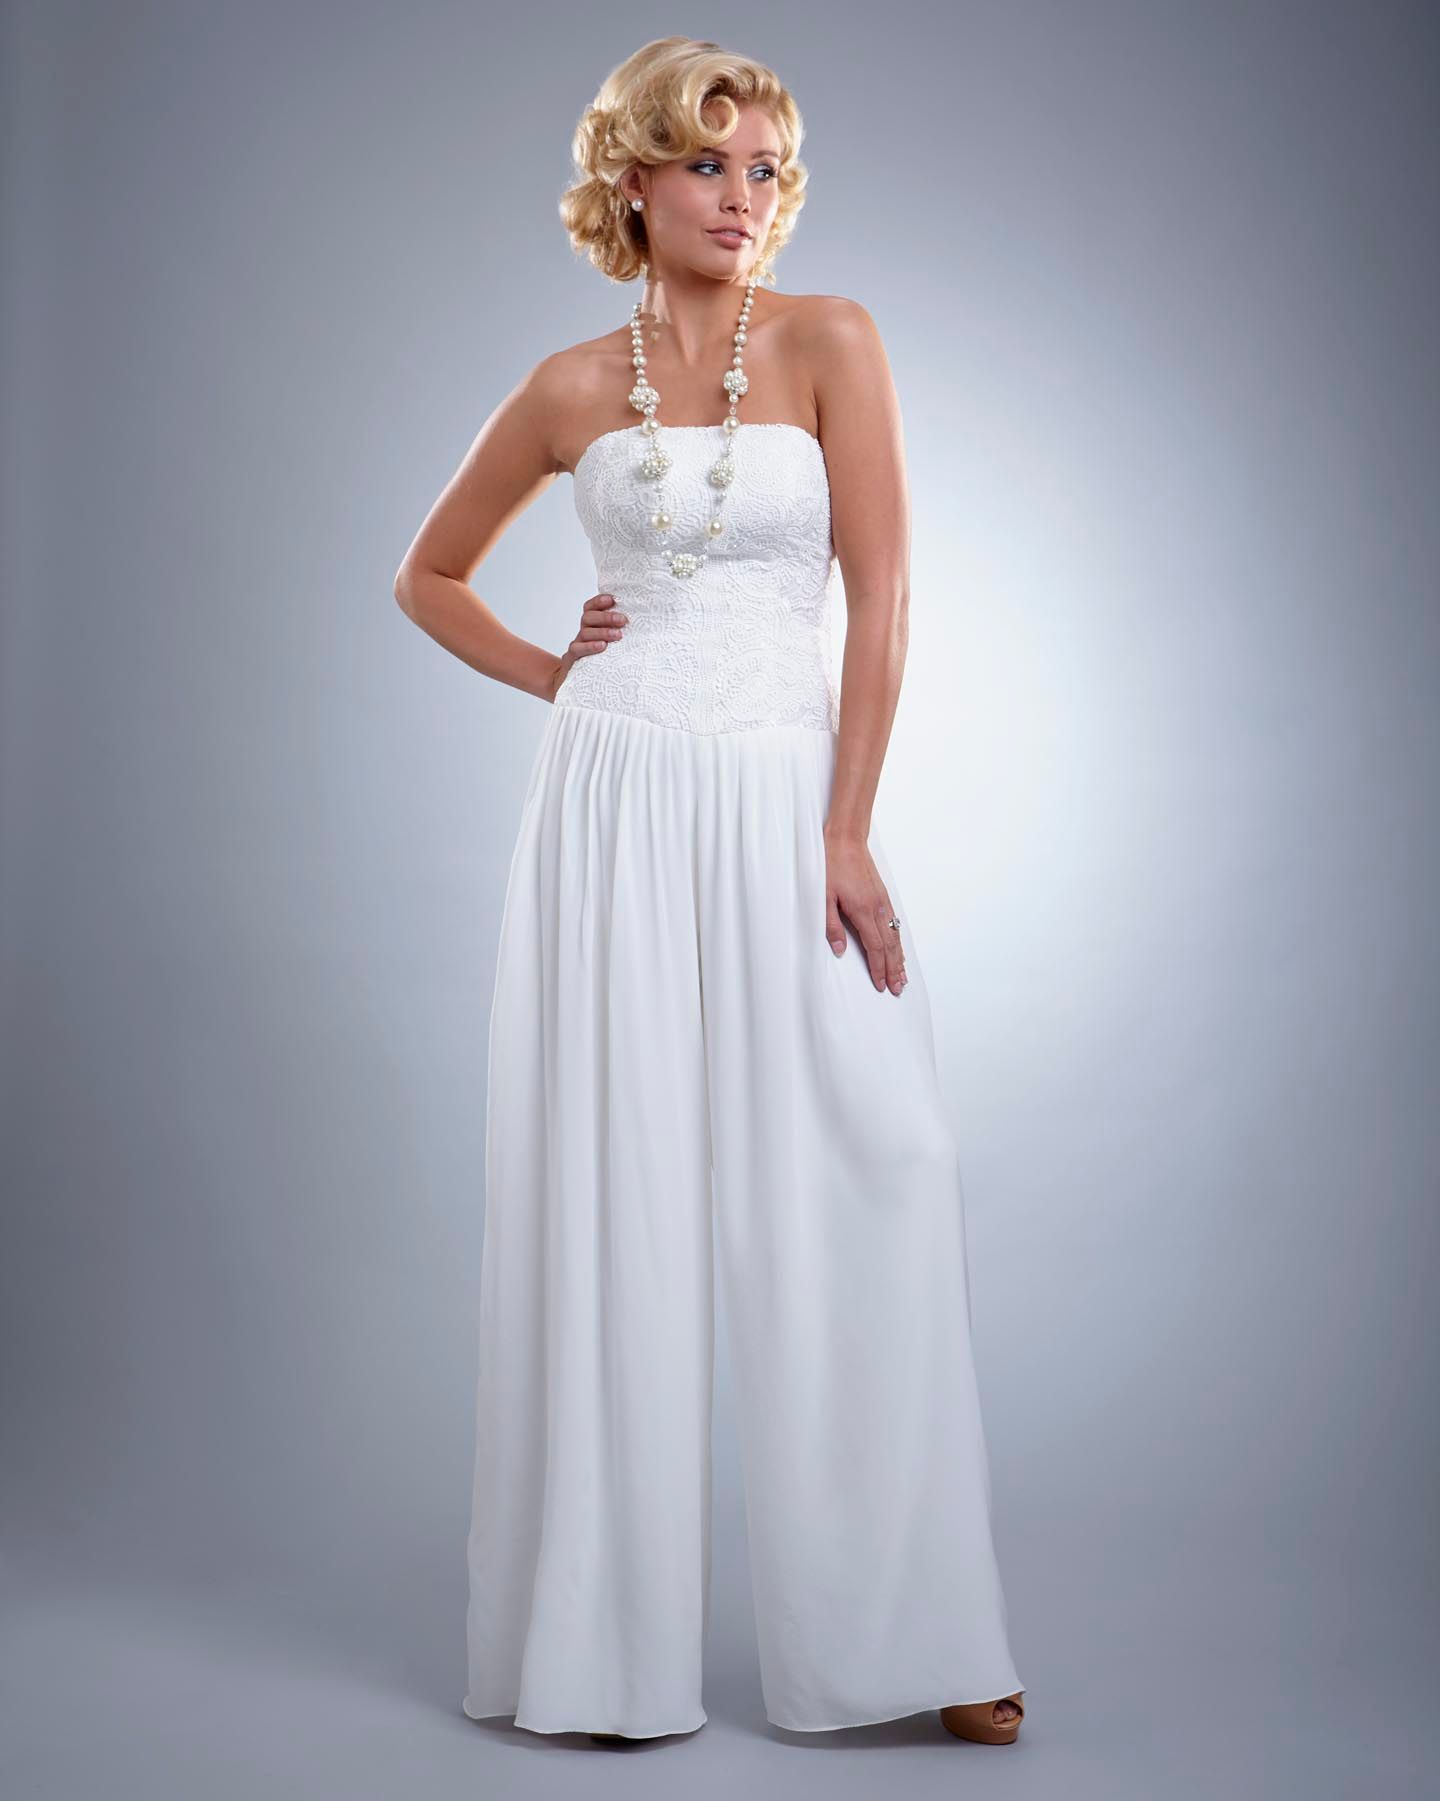 2014 Exquisite Strapless Zipper Fitted Bodice Party Dresses Chiffon ...